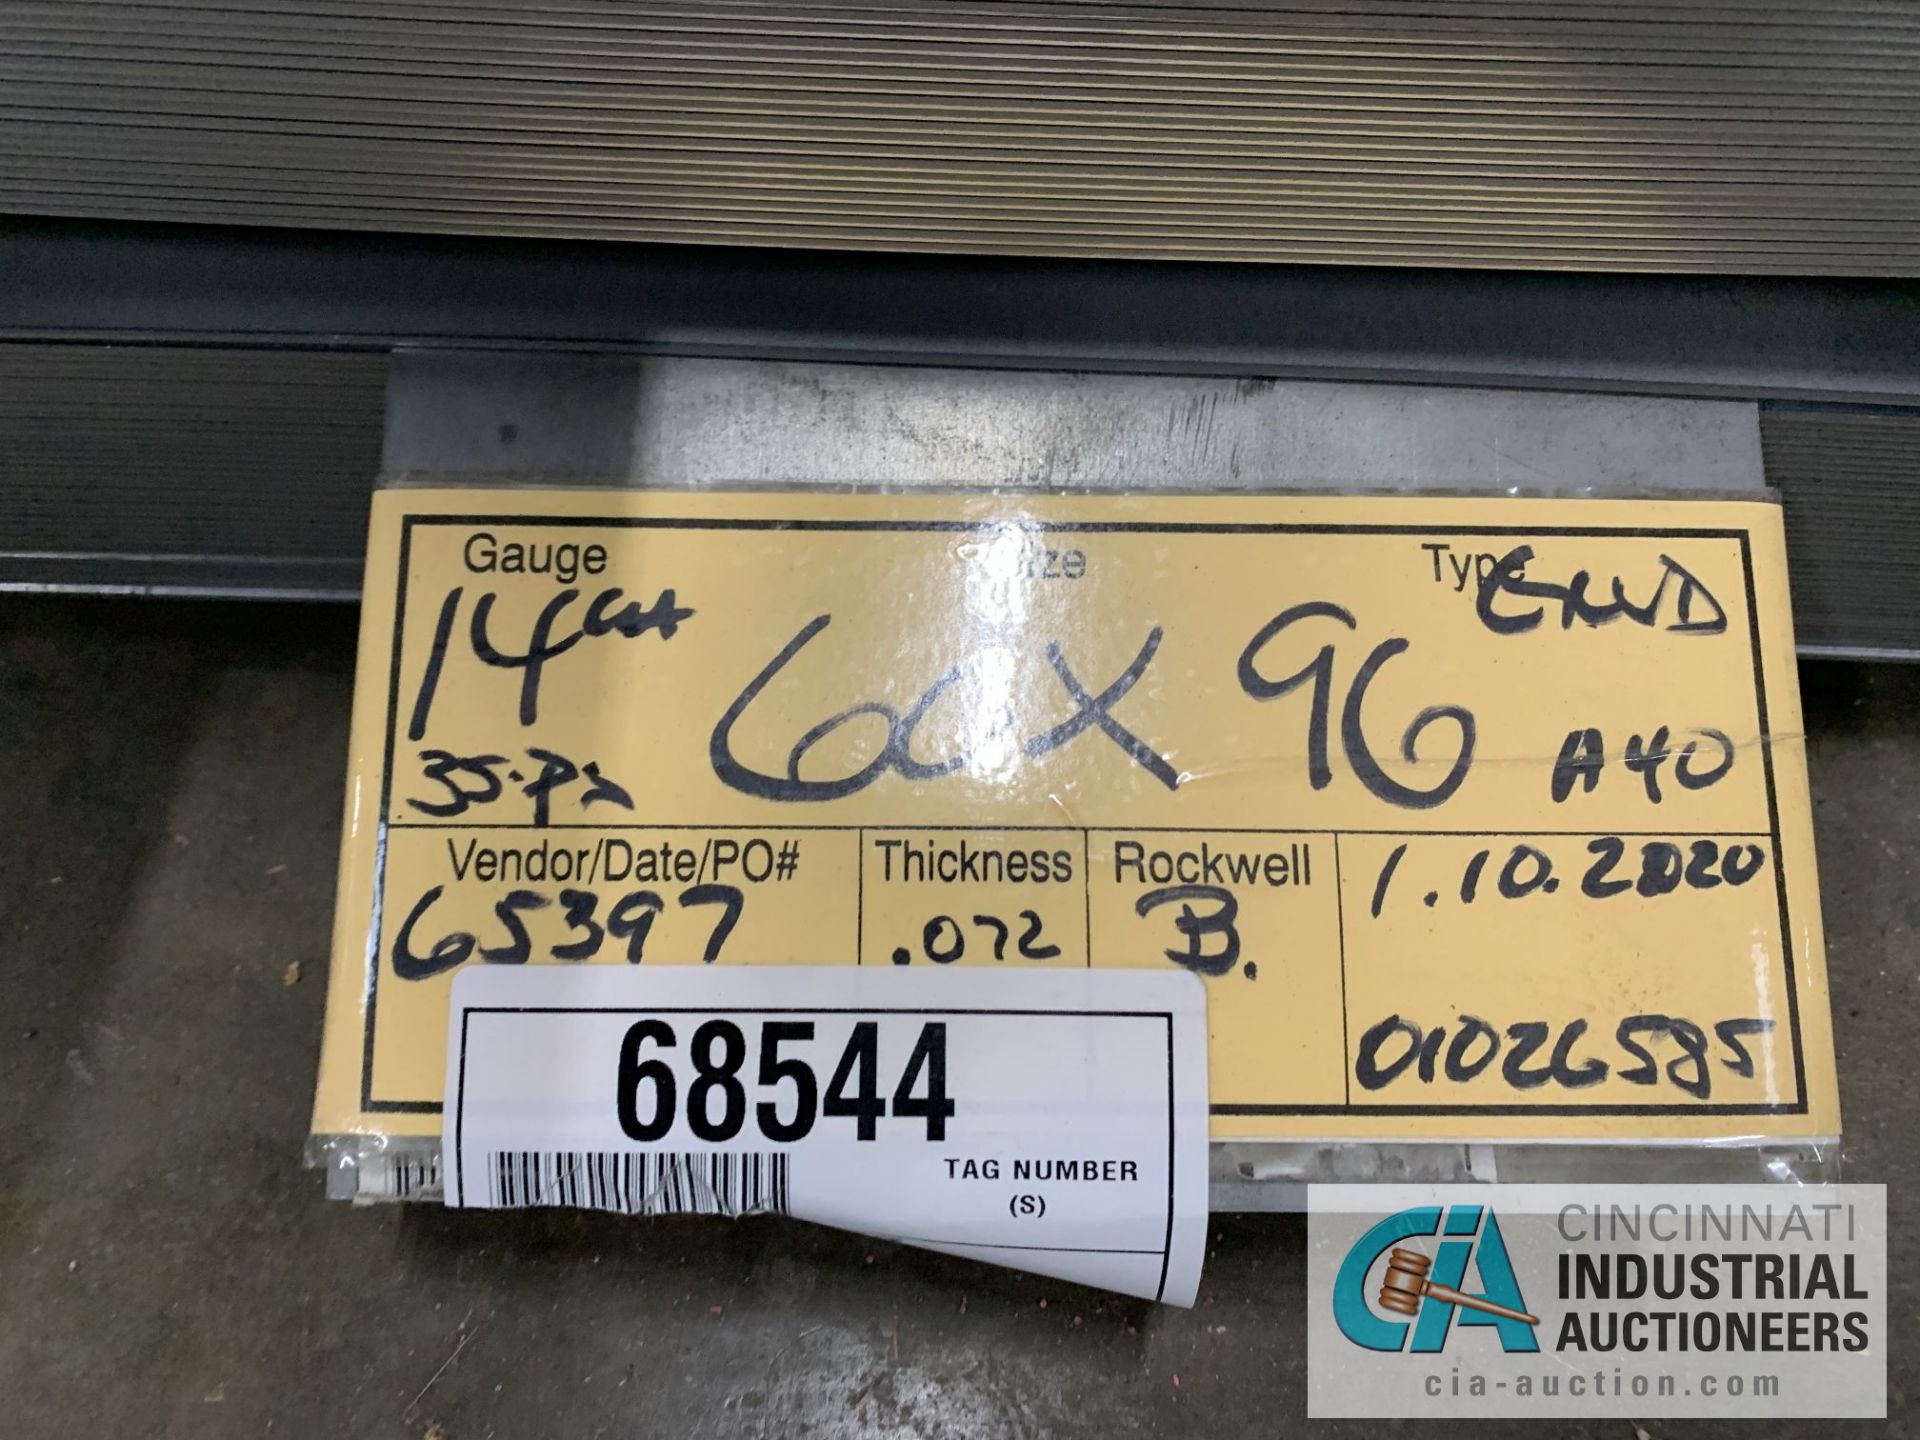 (LOT) APPROX. 30,372 LBS. COATED SHEET STEEL, 1-STACK, 8-BUNDLES, SEE INVENTORY FOR LISTING. - Image 11 of 11